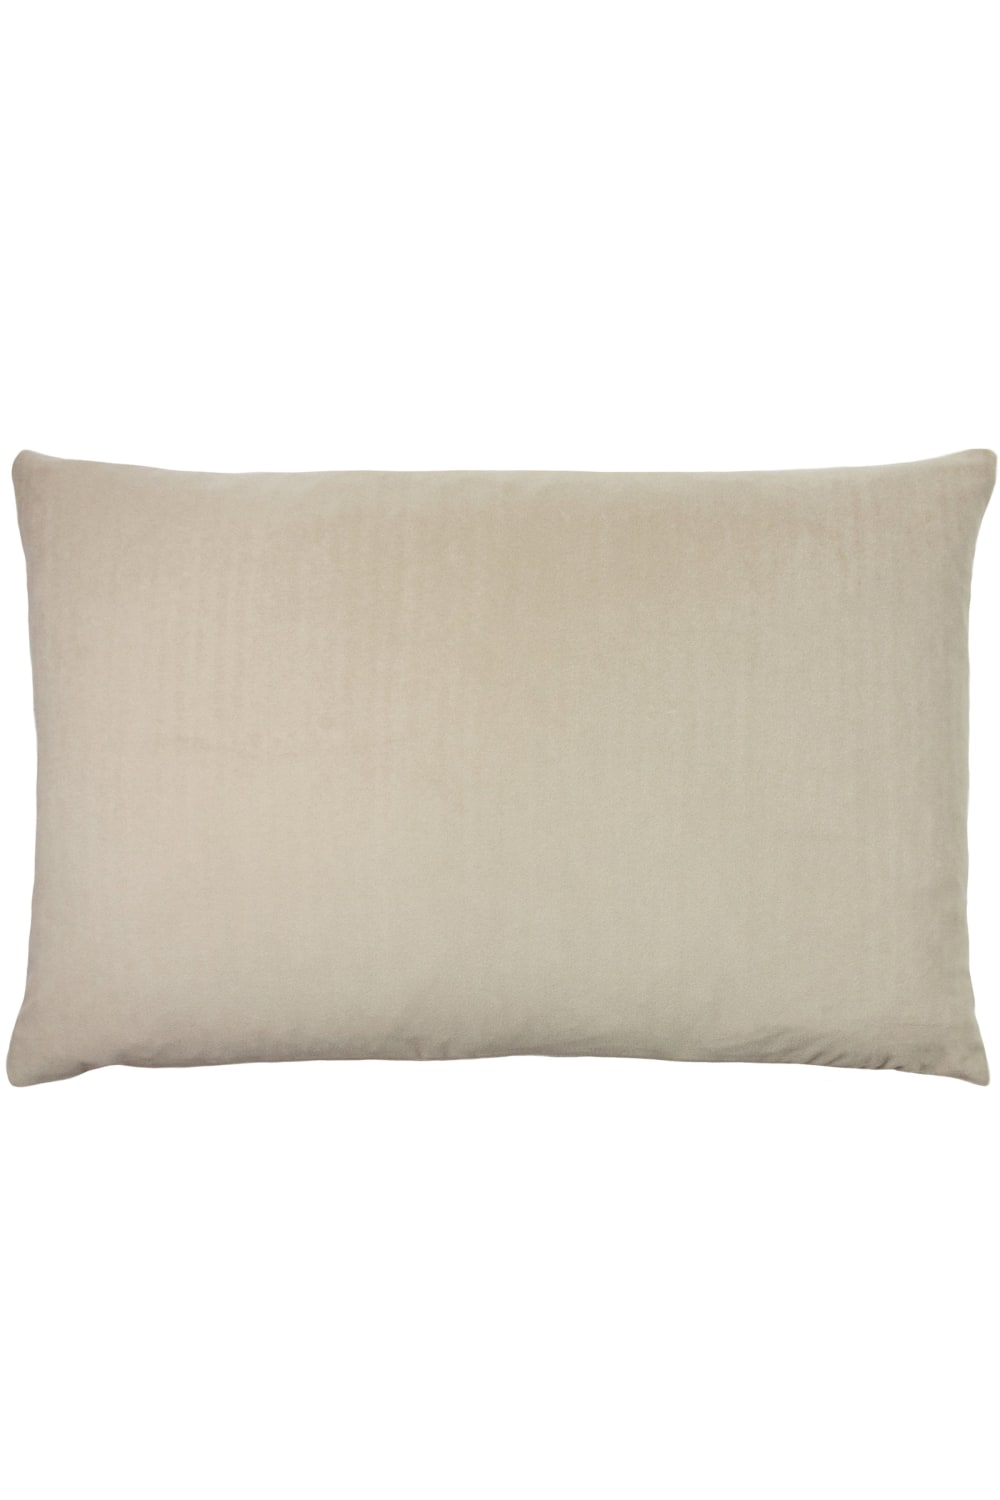 Contra Throw Pillow Cover (One Size)